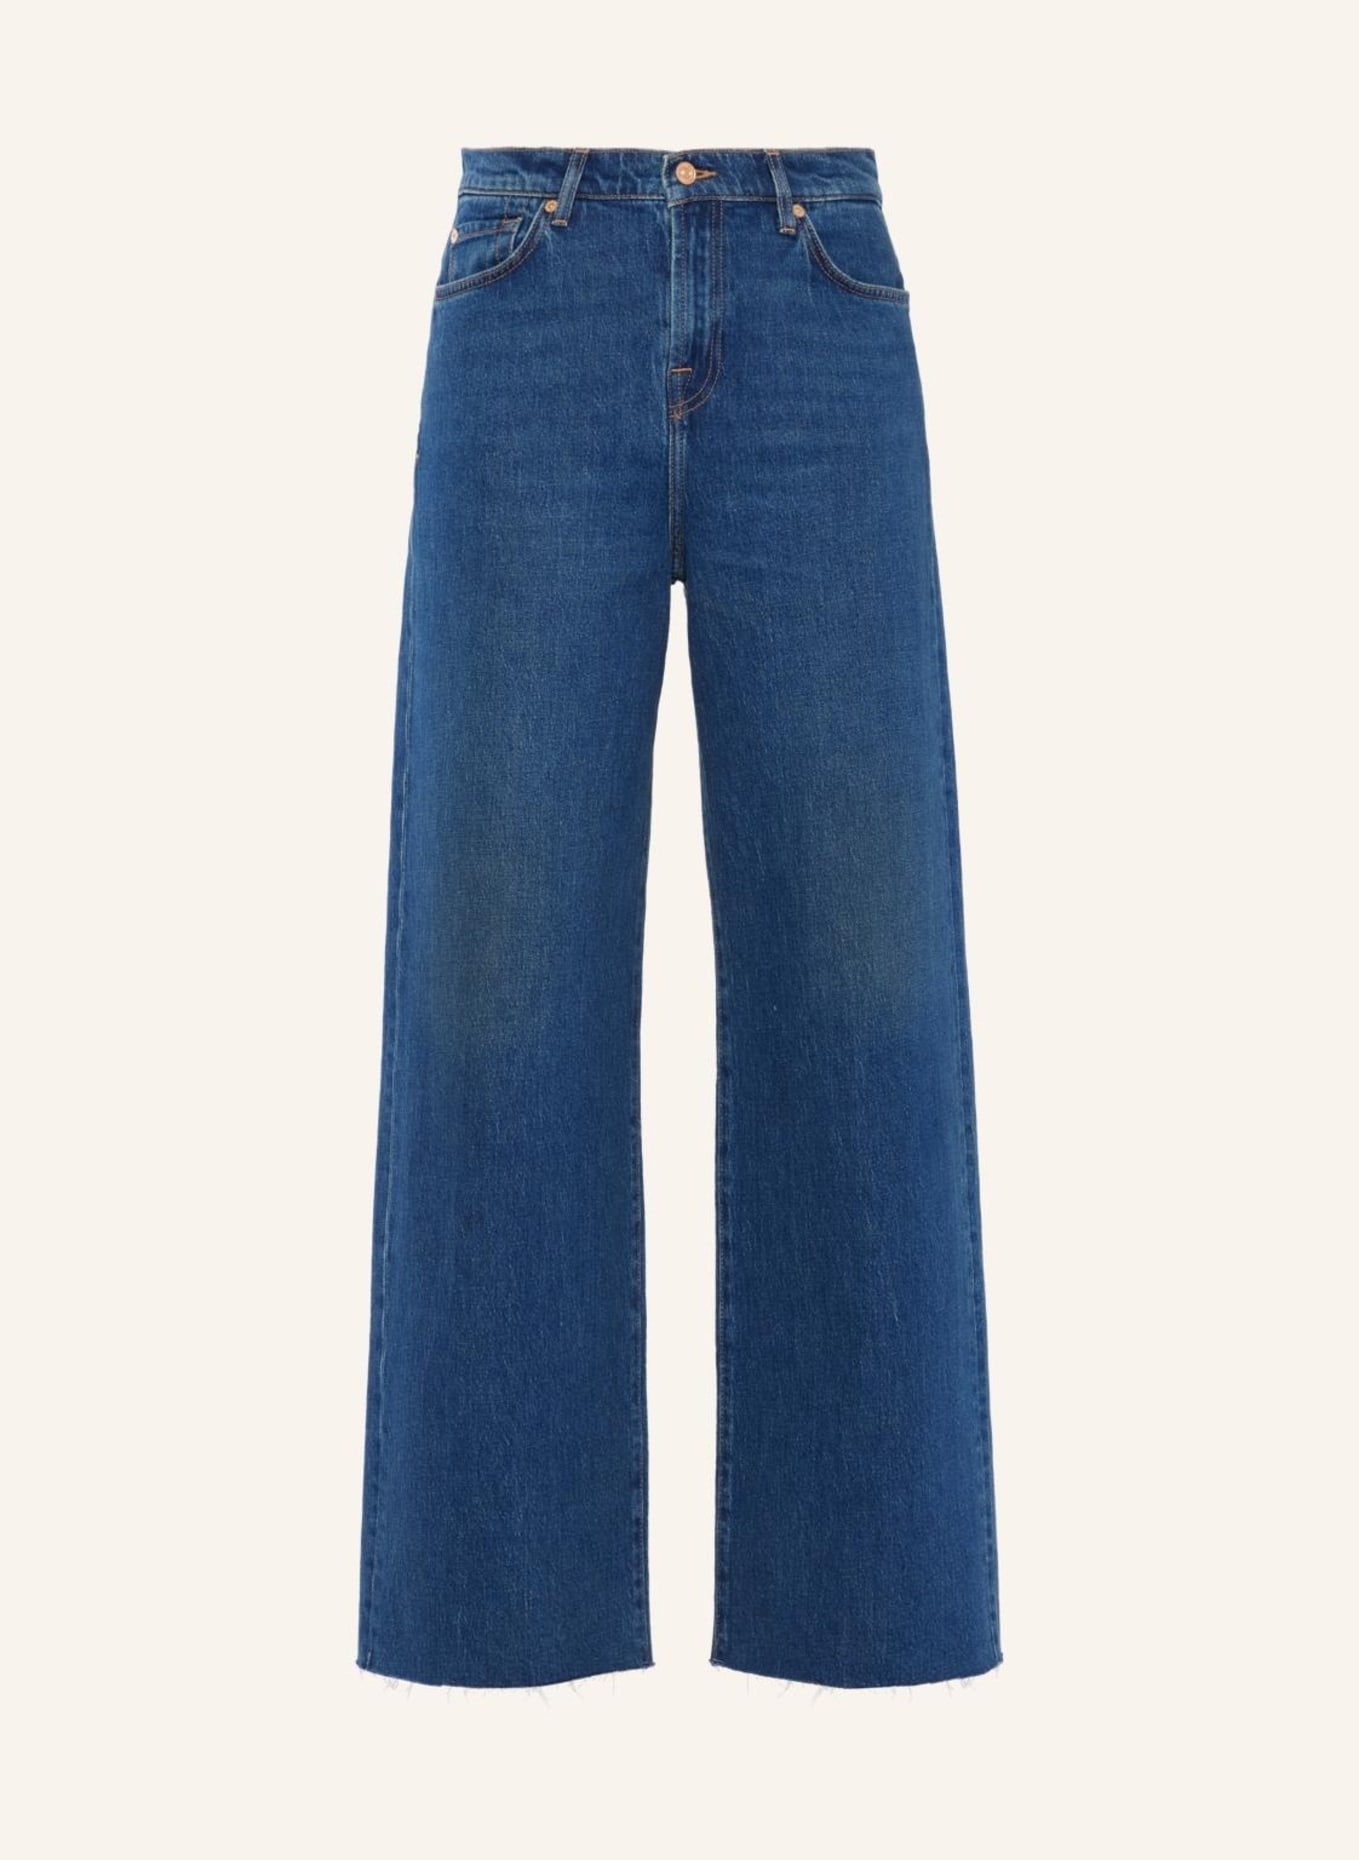 7 for all mankind Jeans SCOUT Straight fit, Farbe: BLAU (Bild 1)